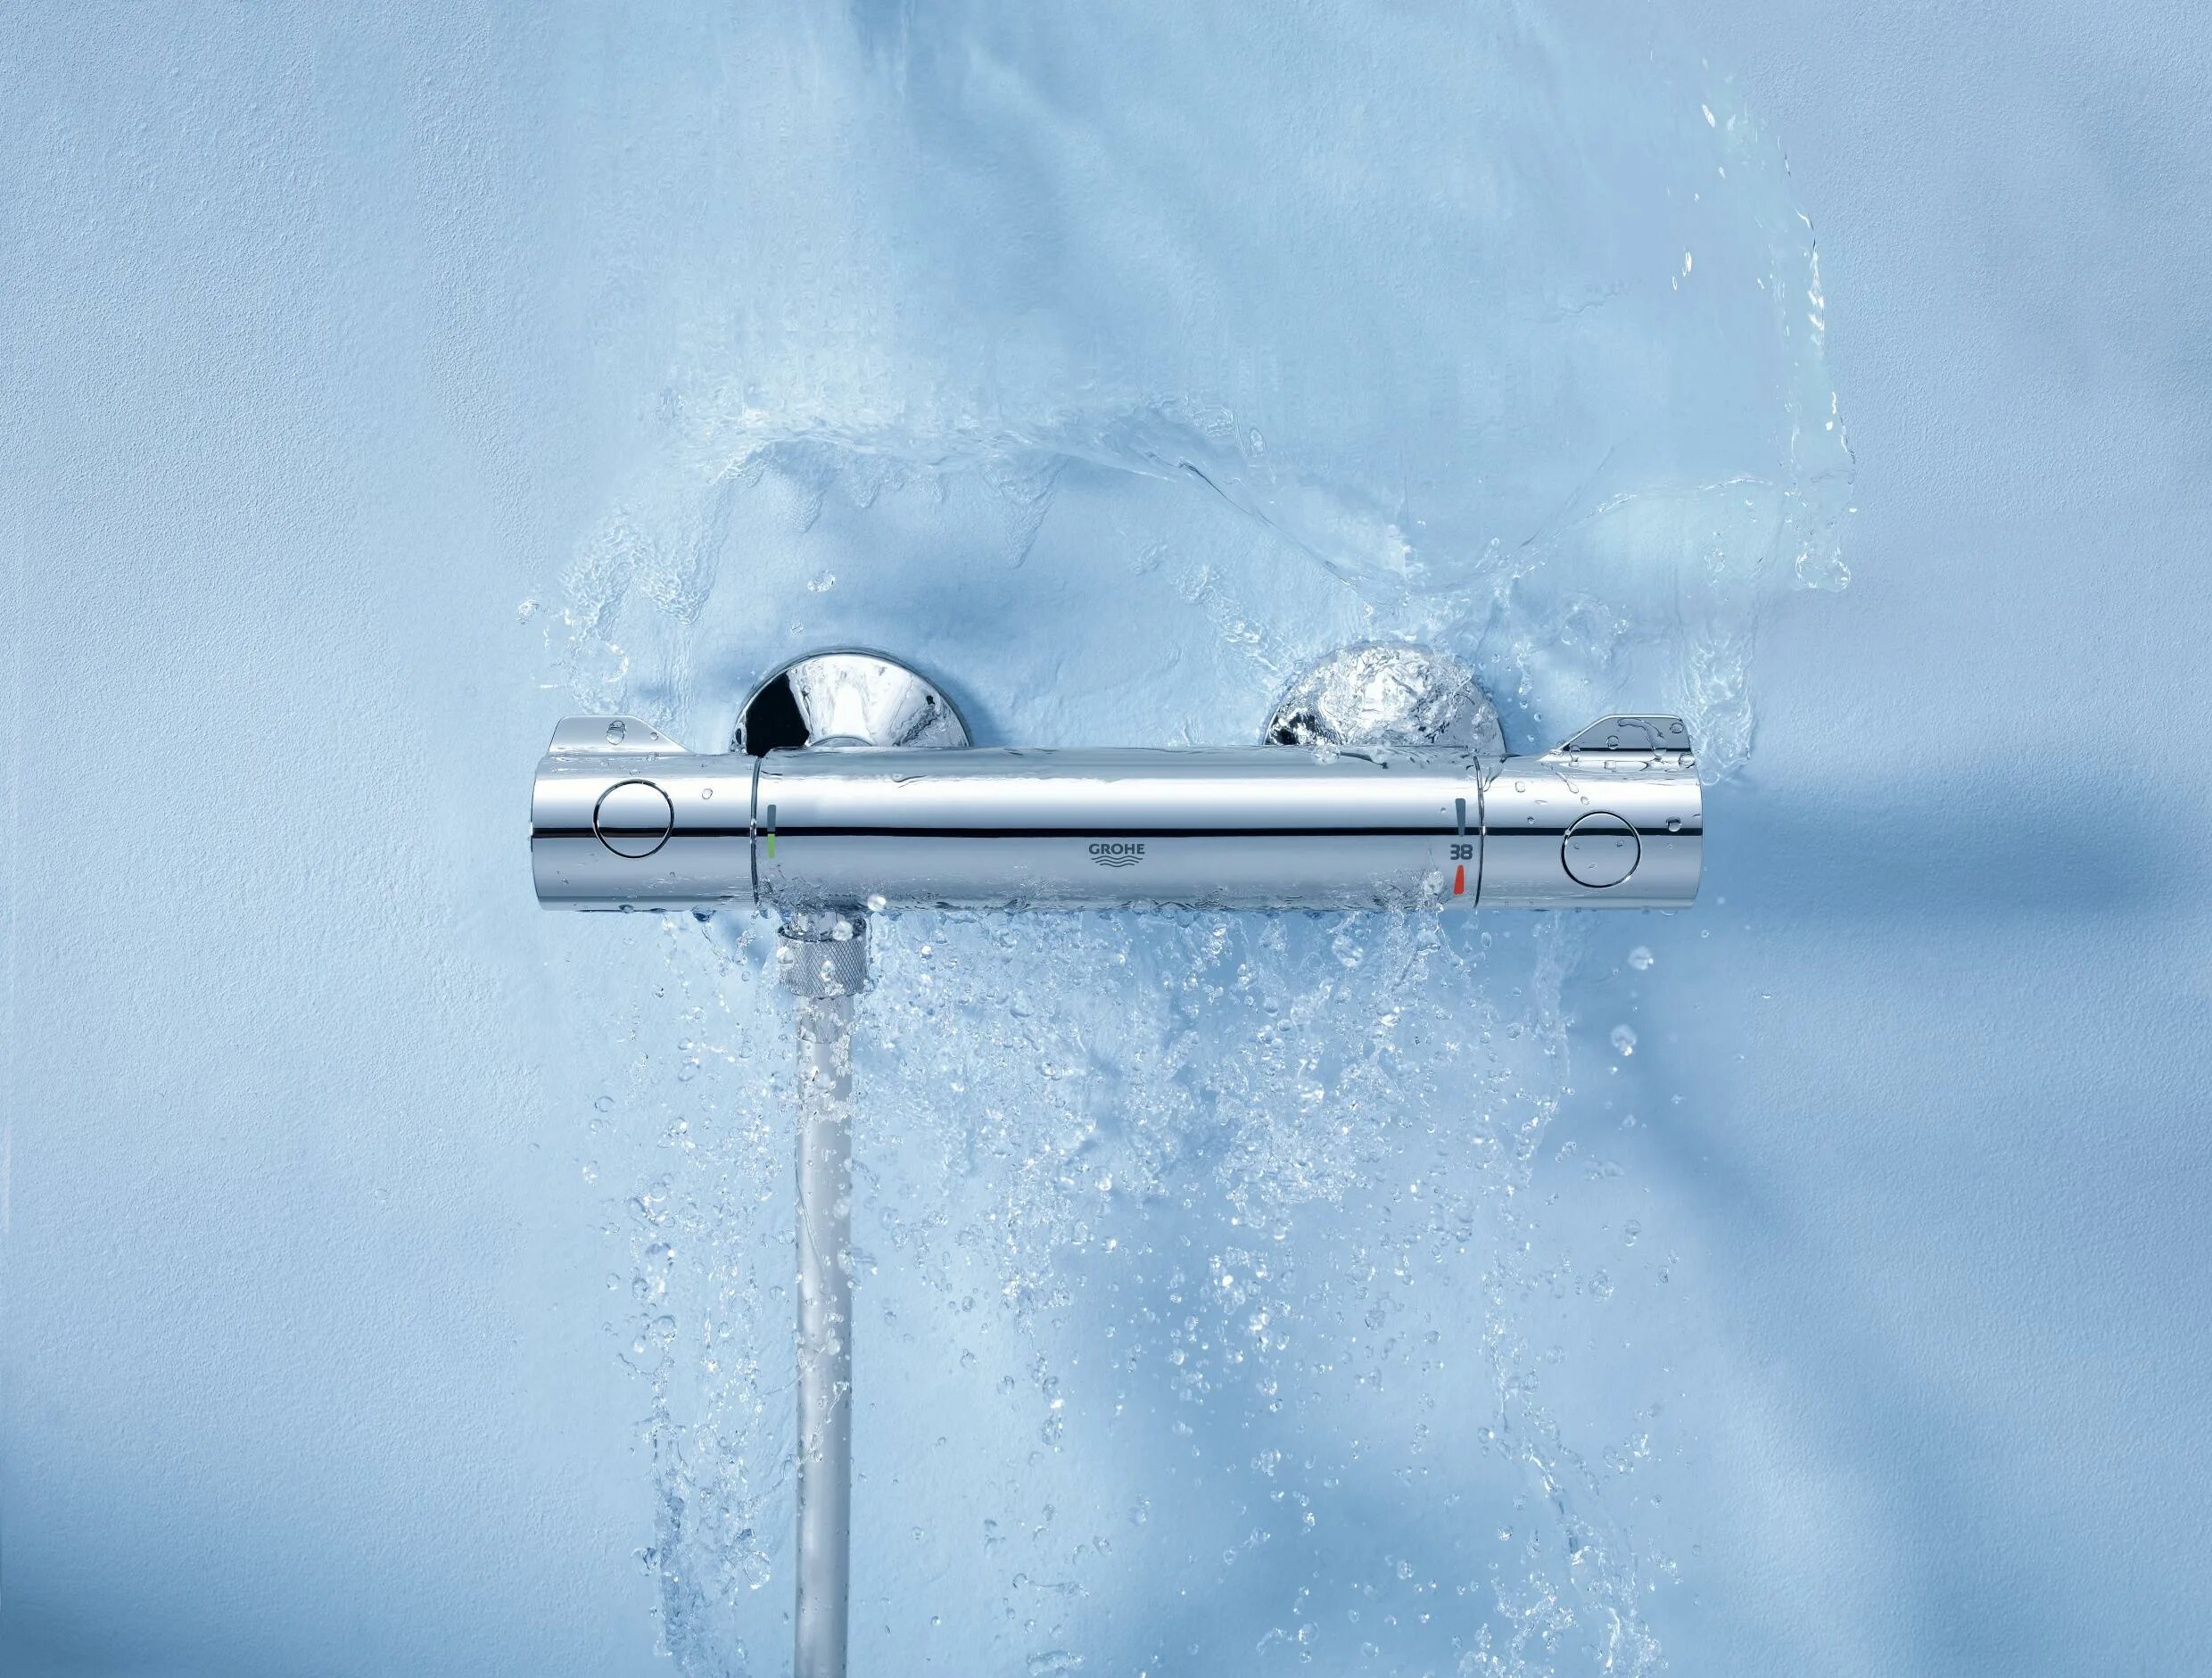 Grohe Grohtherm 800. Grohe Grohtherm 800 34558000. Термостат Grohe Grohtherm 800. Grohtherm 800 34558000.